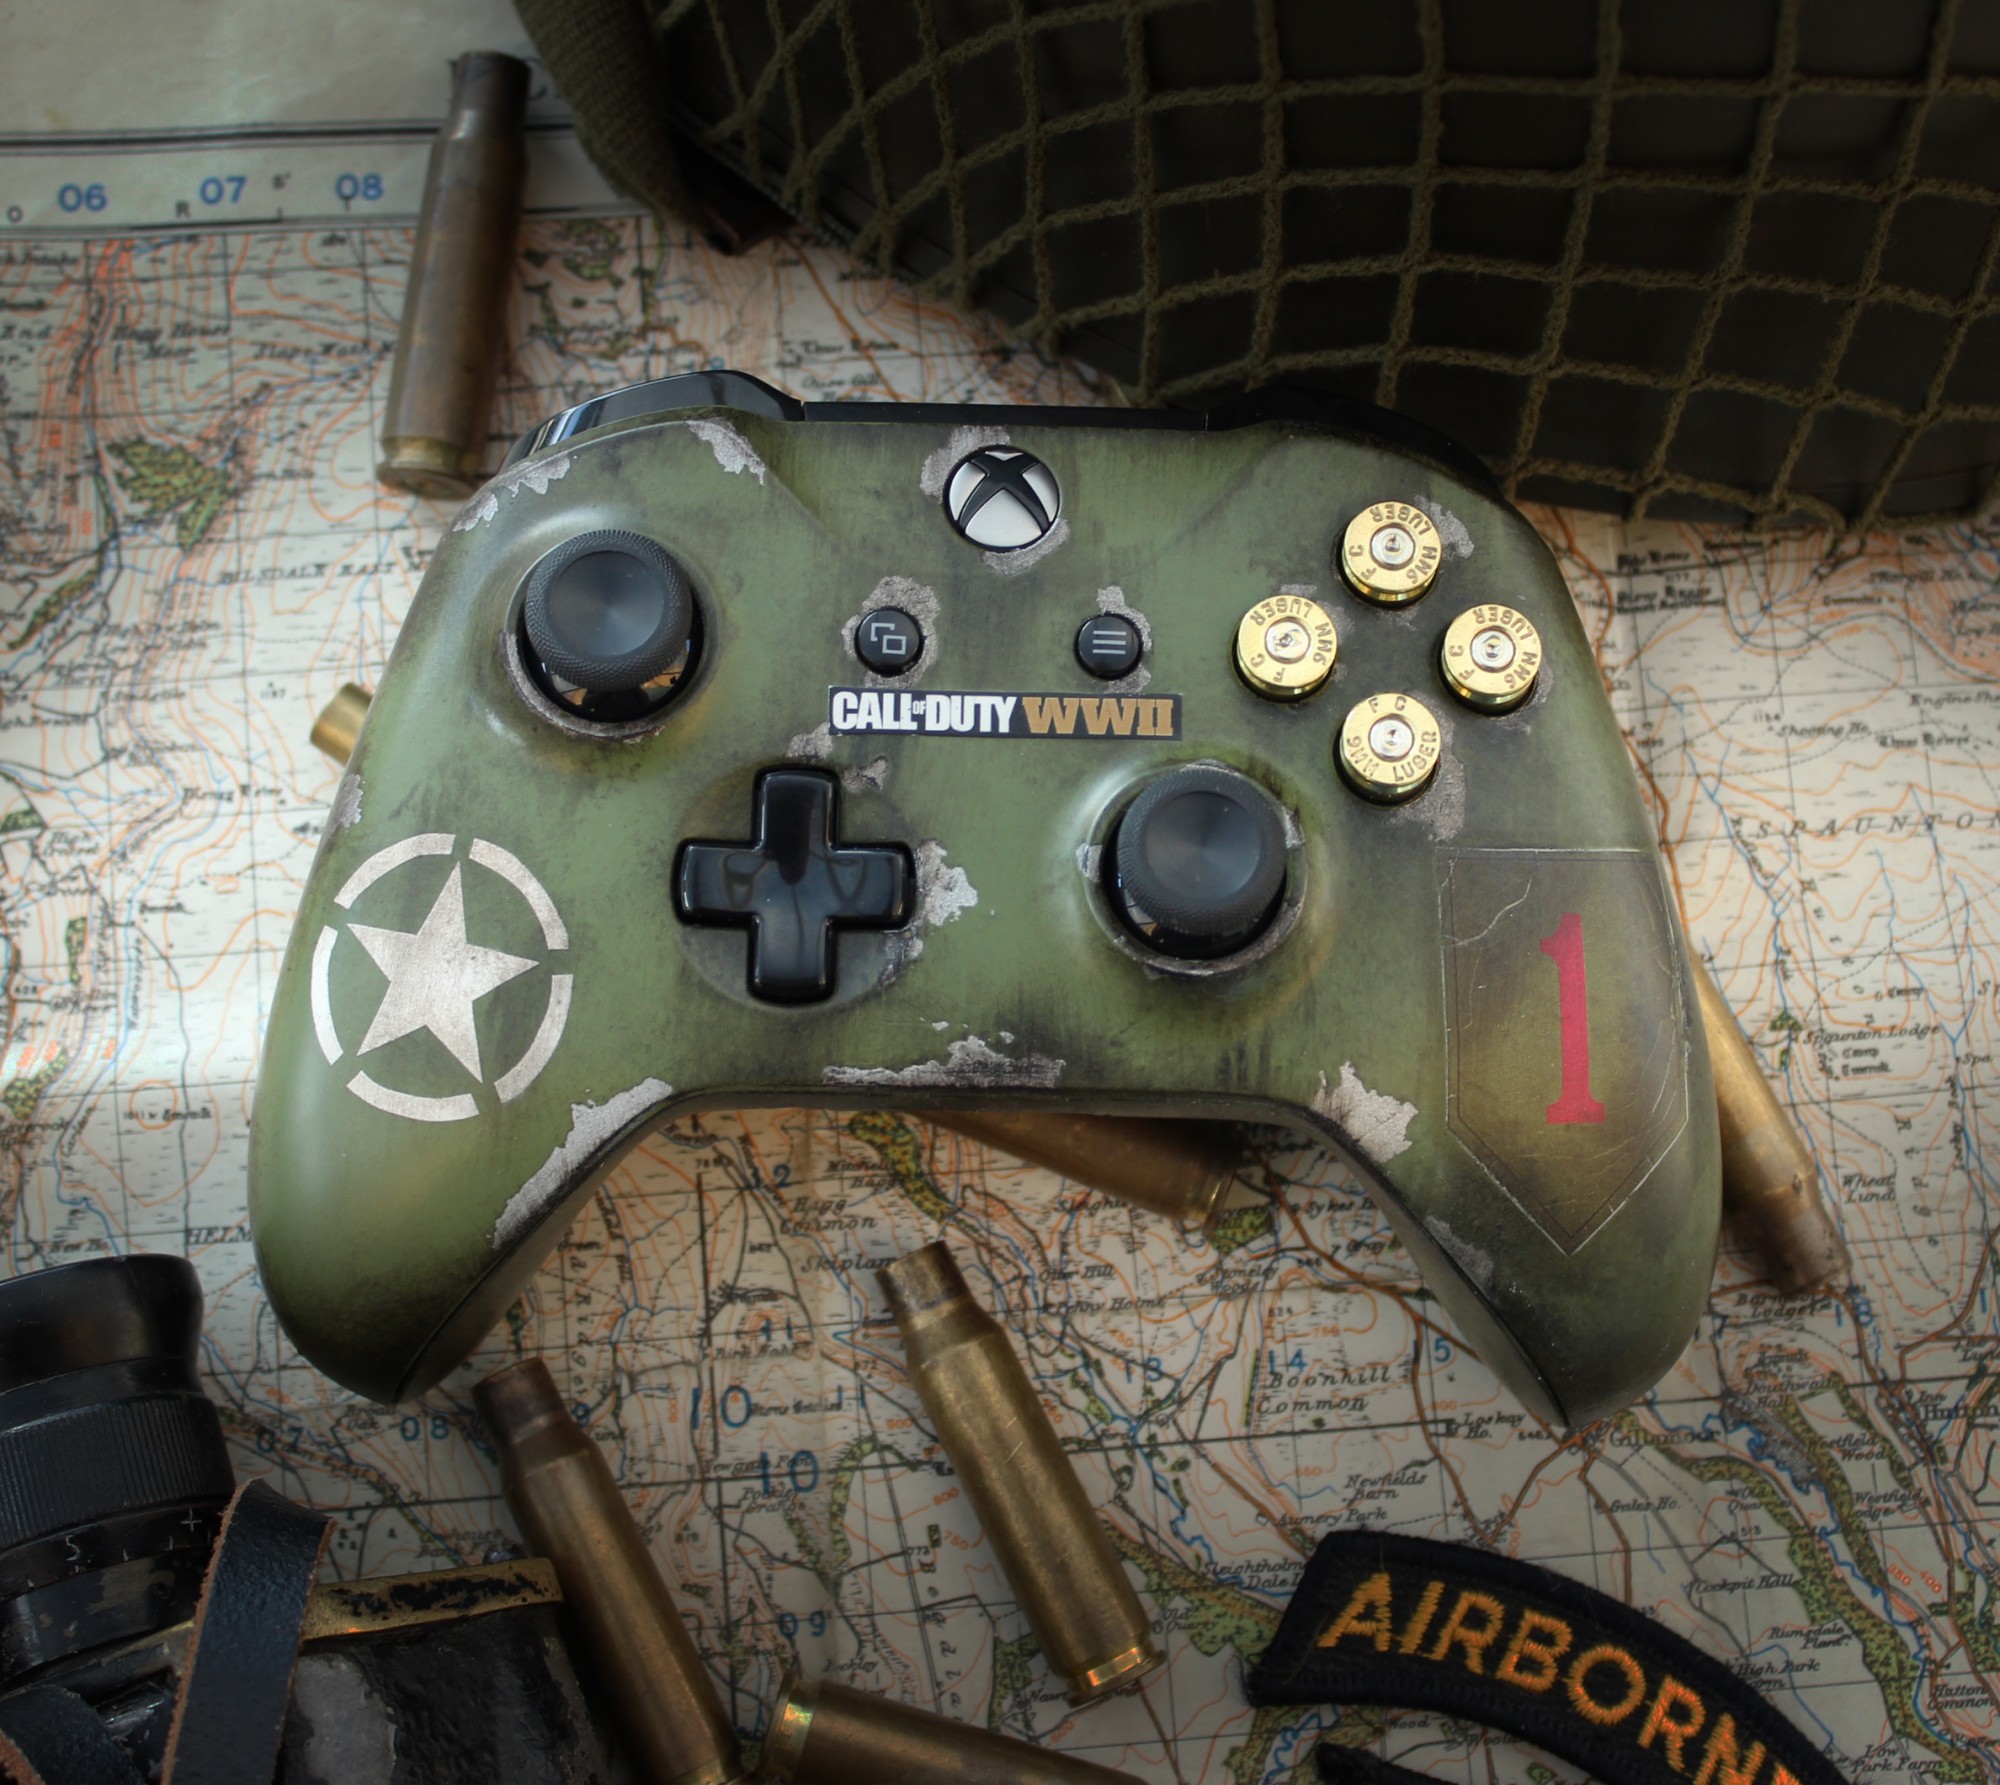 download free ww2 xbox one games